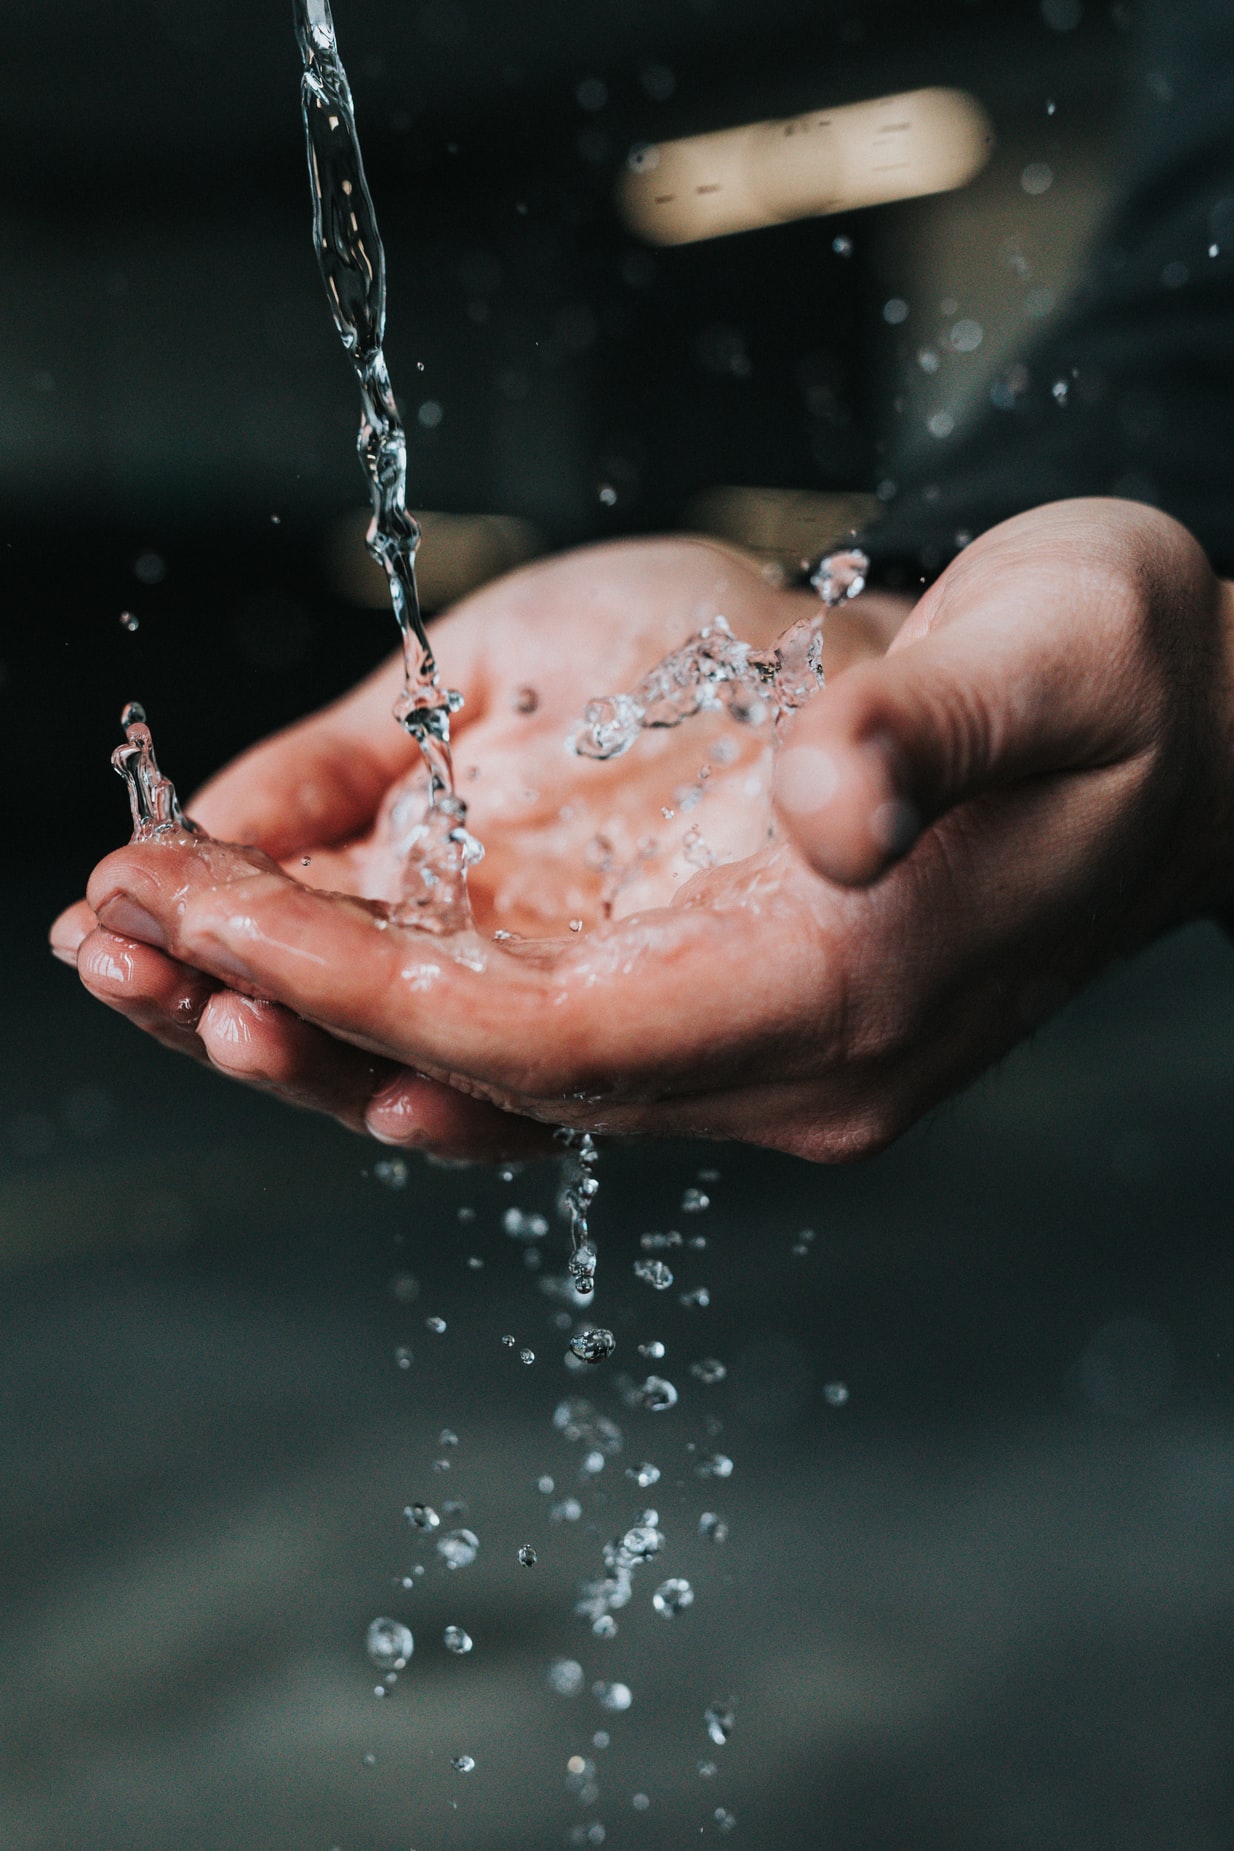 The average American washes his or her hands nearly 9 times per day. If you follow guidelines to scrub your hands with soap for at least 20 seconds, you could save at least 13.5 litres per day by turning off the tap while you scrub.